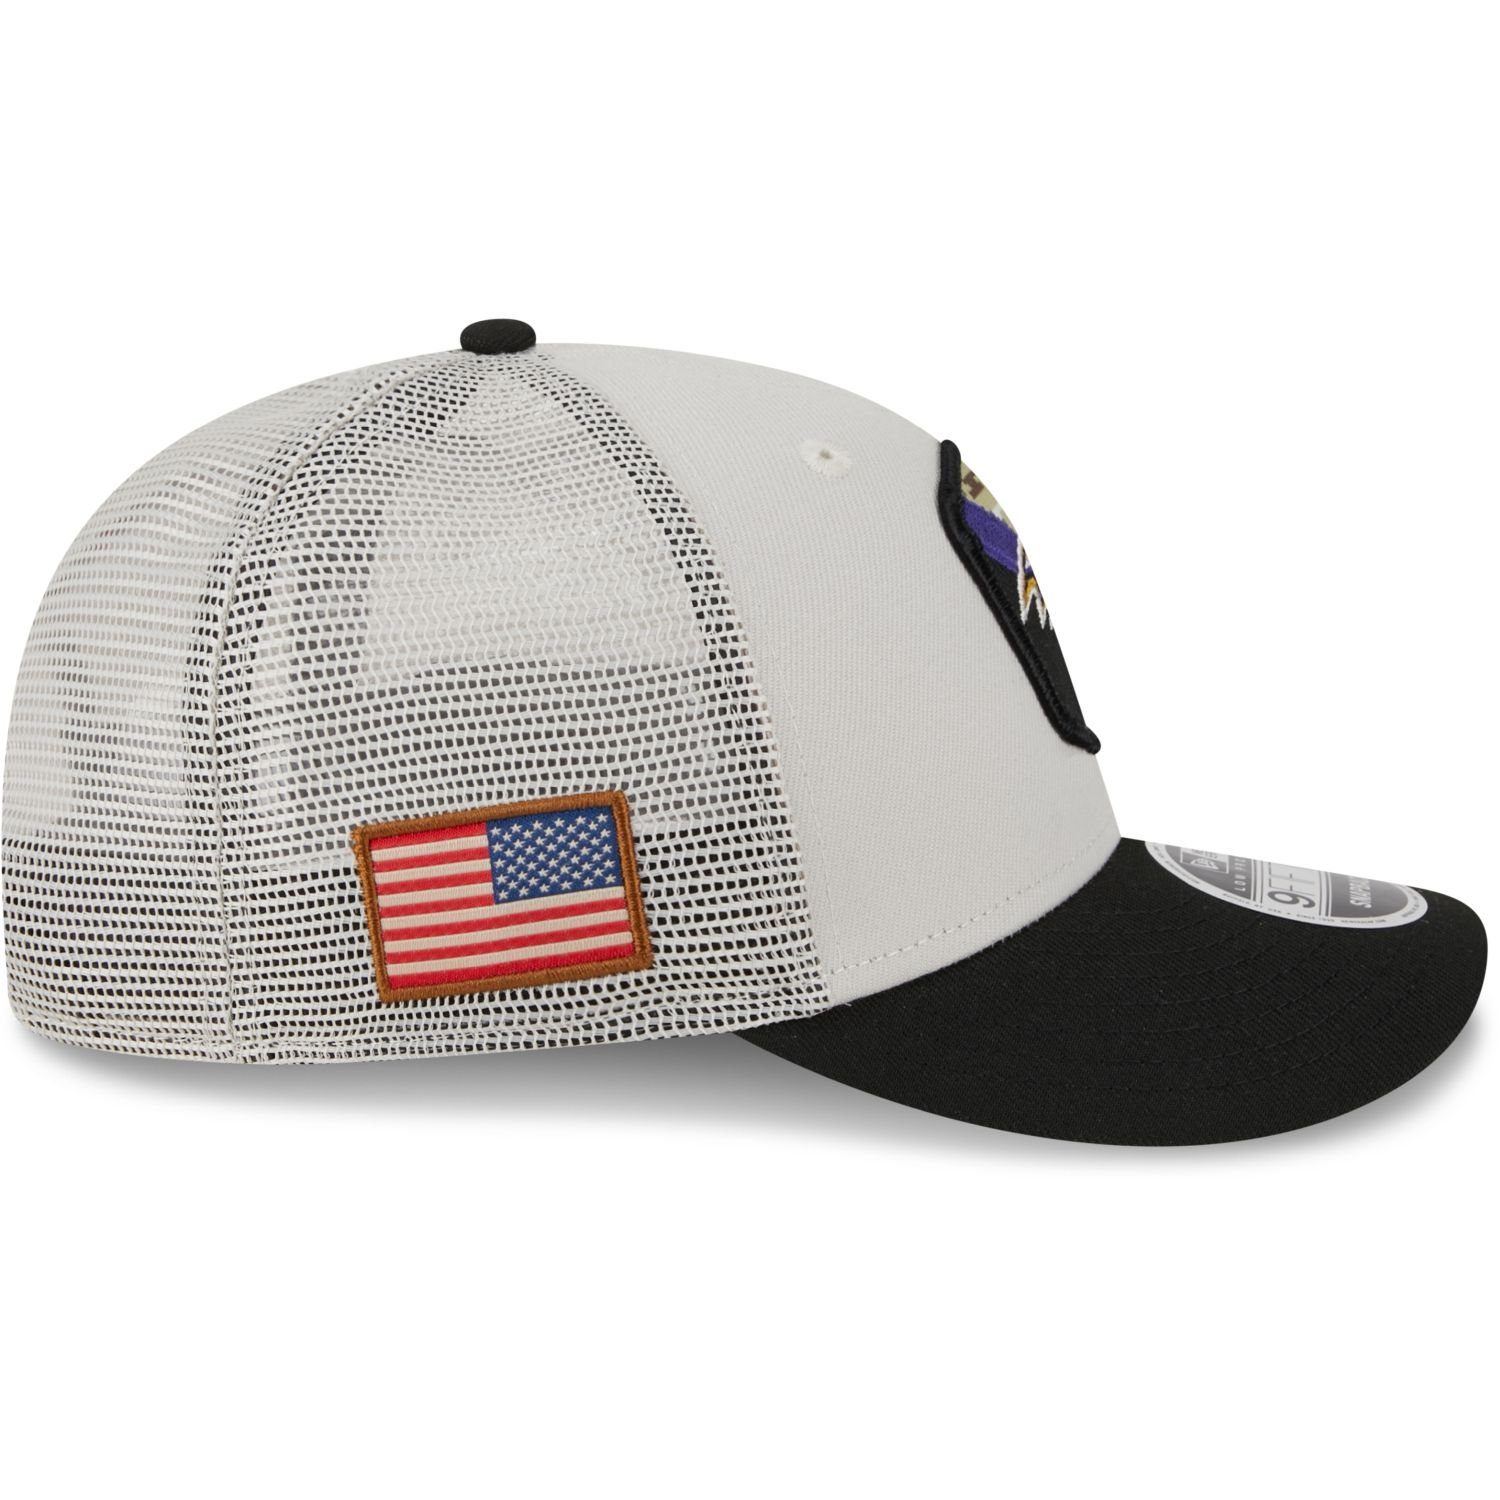 Profile Service 9Fifty Snap Low Baltimore Era Cap NFL New to Snapback Ravens Salute